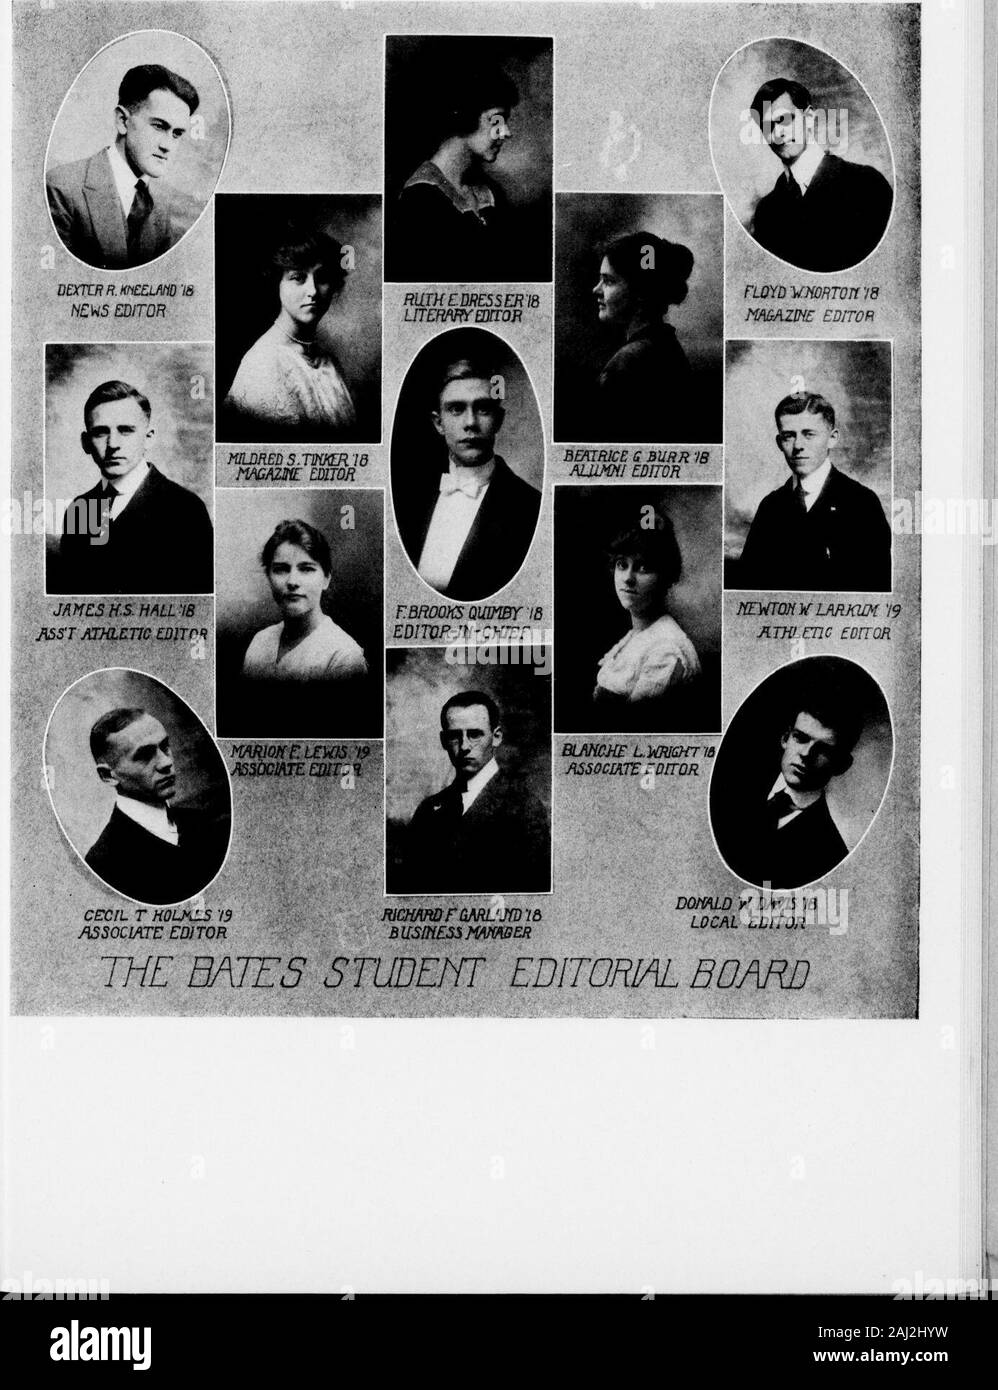 Bates Student . Floyd W. Norton, 18 John Dean, 10 Hazel E. IIutchins, 10 NEWS DEPARTMENTNews Editor, Dexter Kneeland, 18Athletic Editor, Newton W. Larkum, 19 Associate, James H. S. Hall, 18Alumni Editor, Beatrice G. Burr, 18 Local Editor, Donald W. Davis, 18 Associate Editors Blanche L. Wright, 18 Marion Lewis, 19 Clinton A. Drury, 19 Cecil Holmes, 19 BUSINESS MANAGEMENTManager, Richard F. Garland, 18 Assistants Wendell A. Harmon, 19 Sanford L. Swasey, 19 ONE KEY TO FREEDOM It is in our college days that we pick up, either consciouslyor unconsciously, the keys which are to unlock for us latert Stock Photo